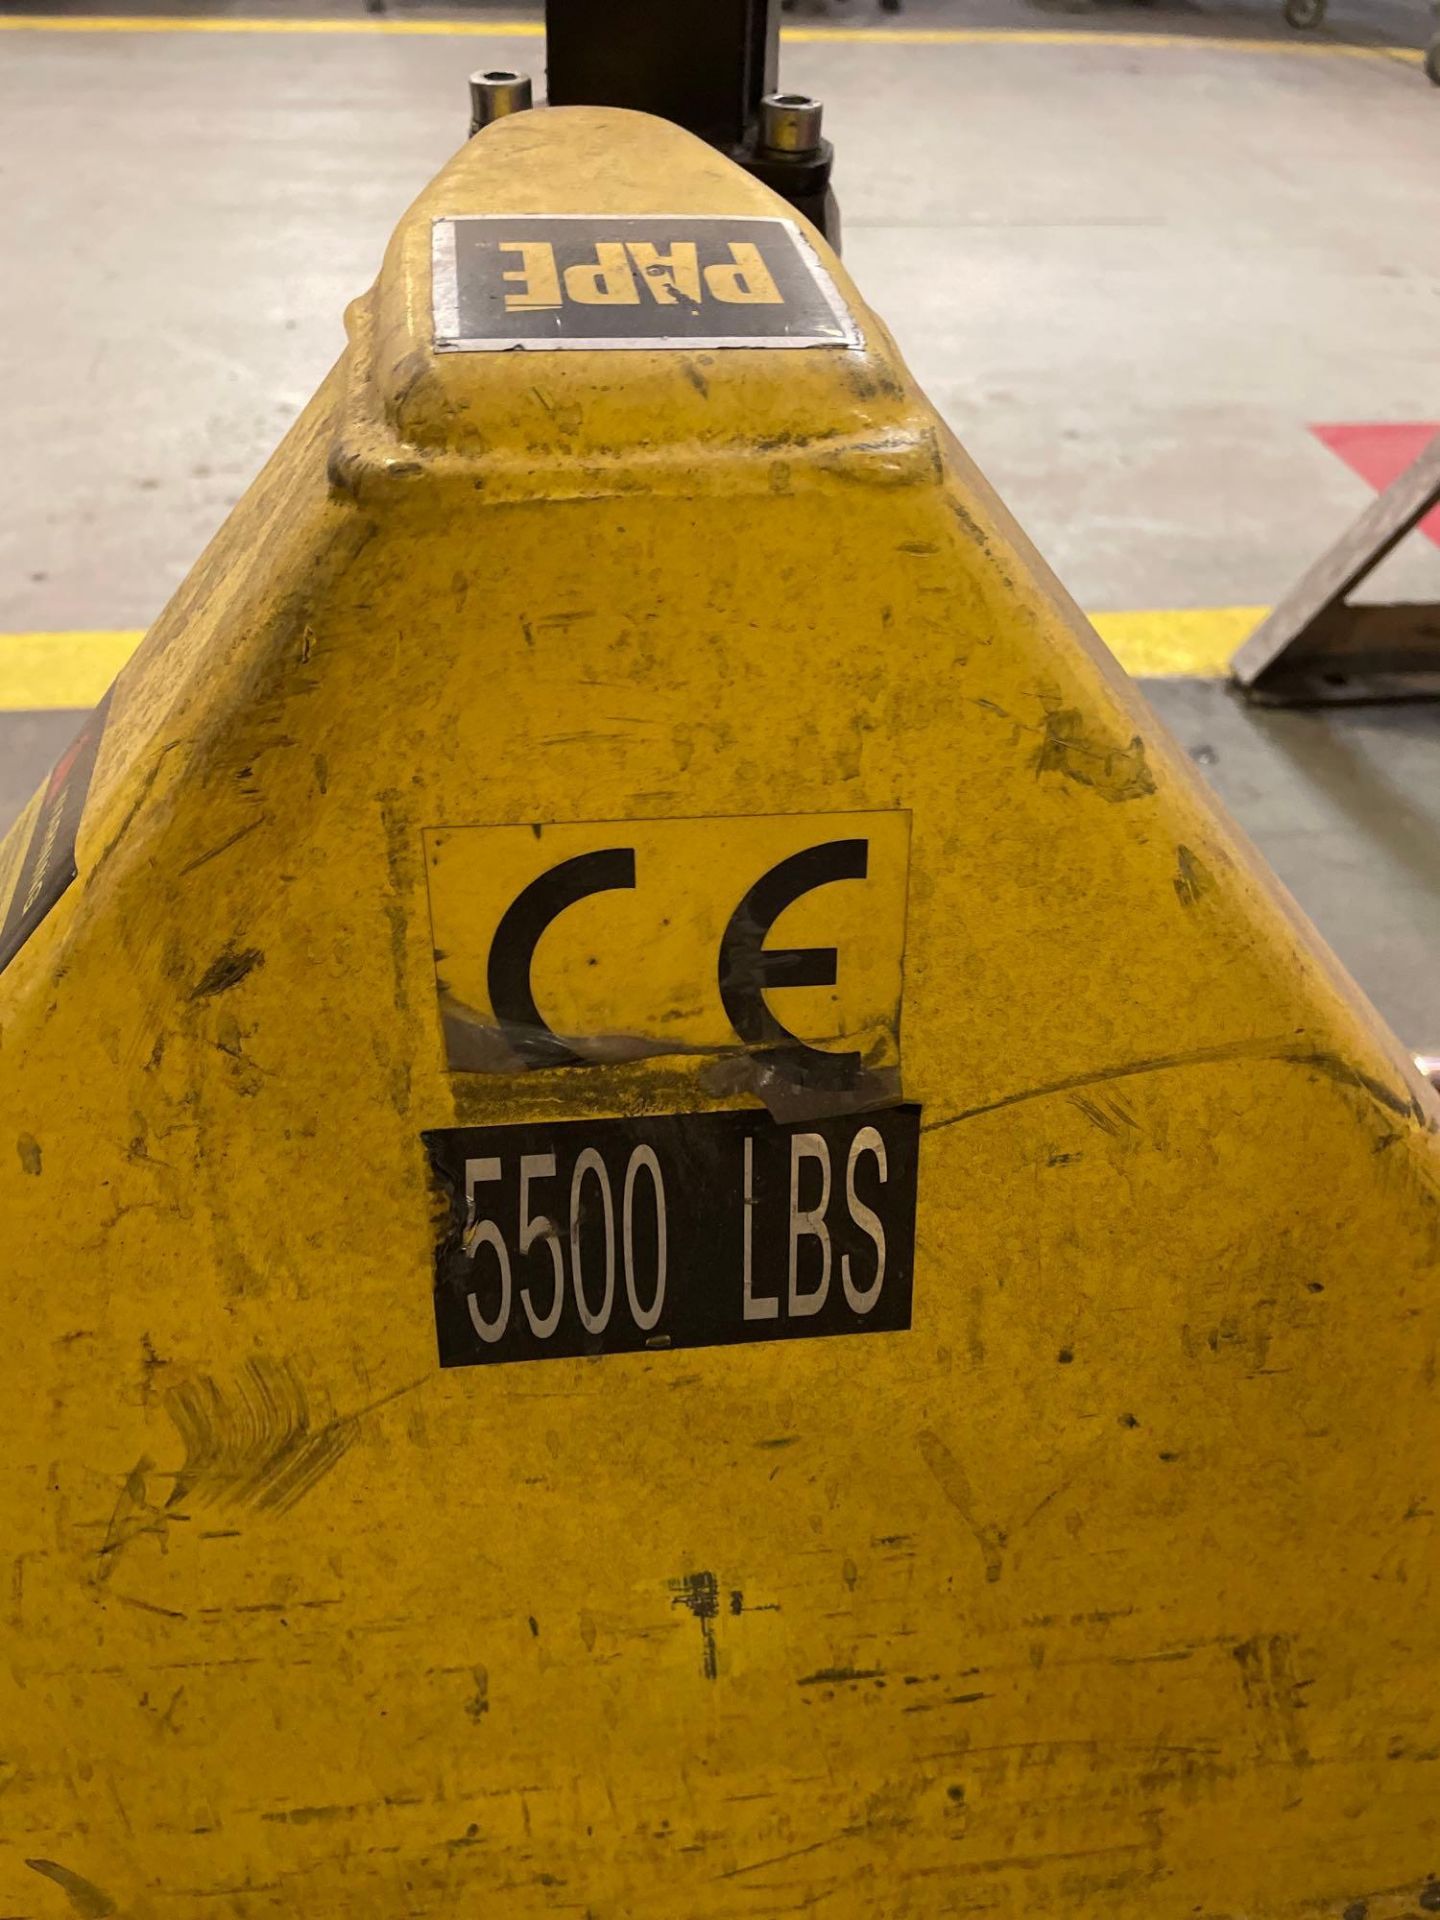 Lot of 2 Pallet Jacks: (1) Pape, max. 5,500 lbs., (1) Hyster, max. 5,500 lbs. - Image 2 of 4